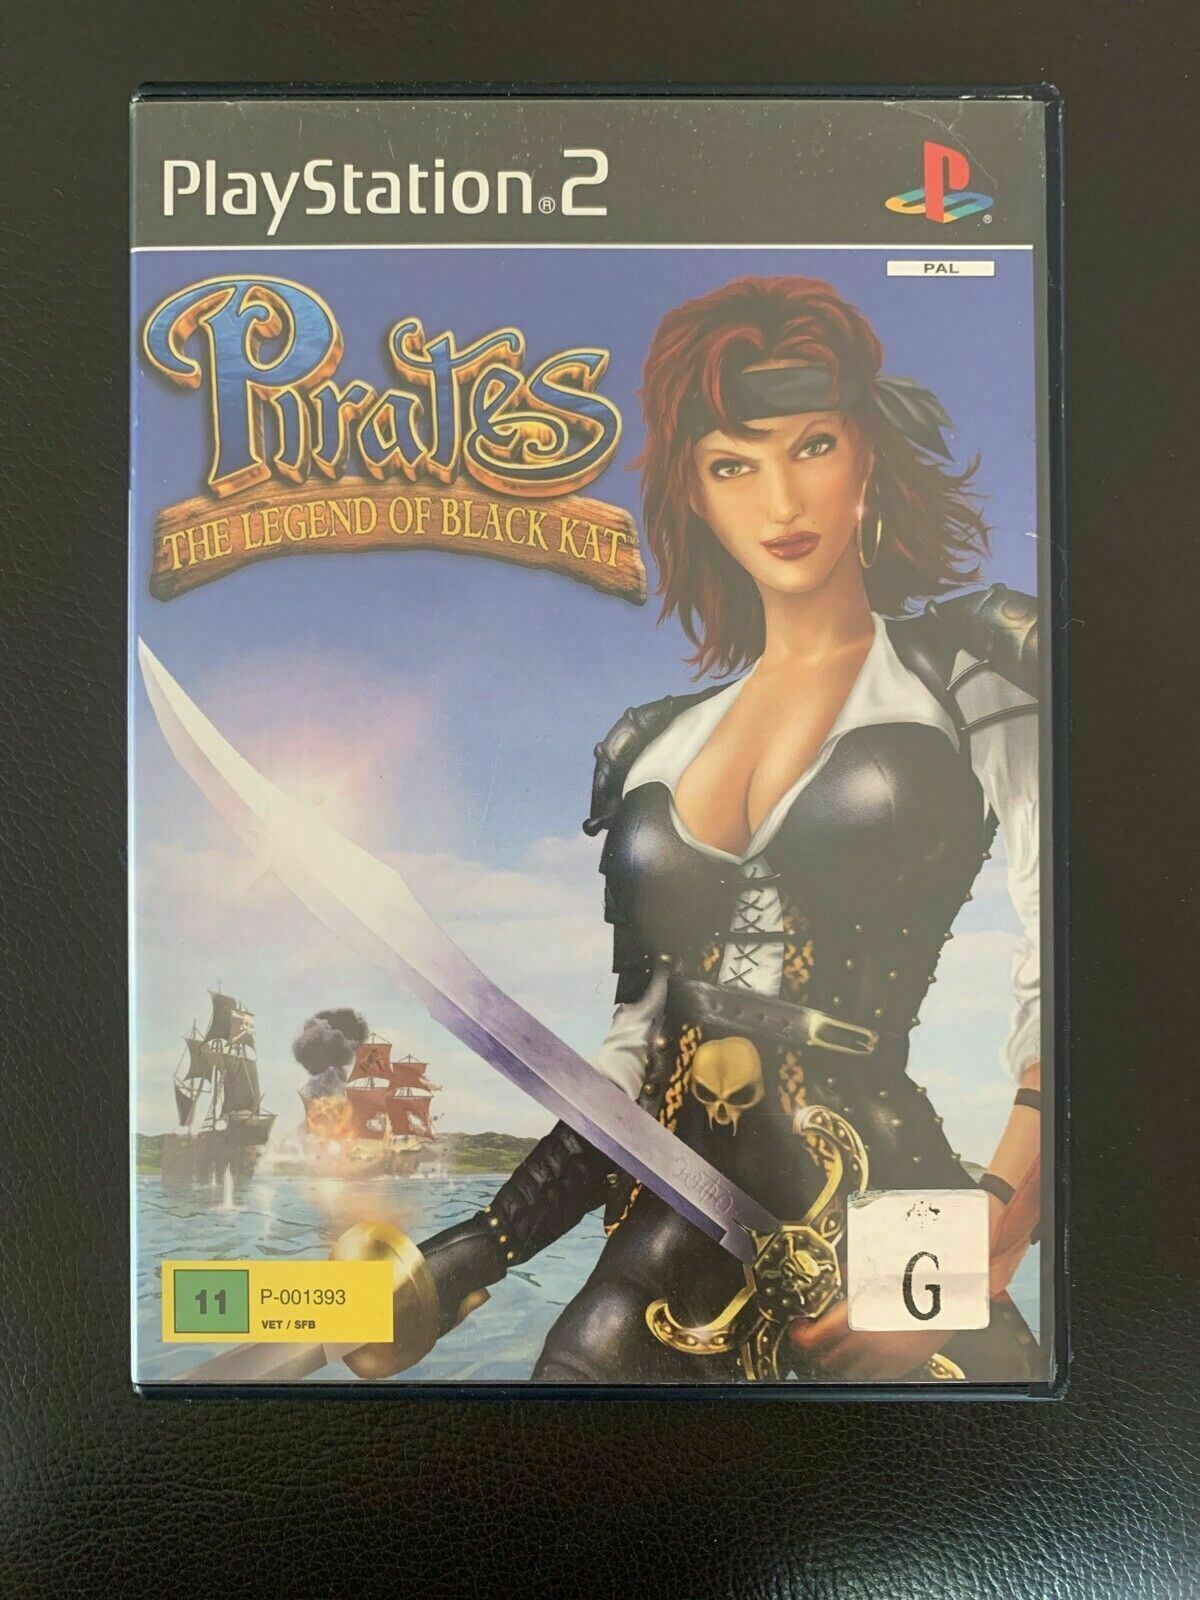 Pirates The Legend Of Black Cat - Playstation PS2 Game with Manual